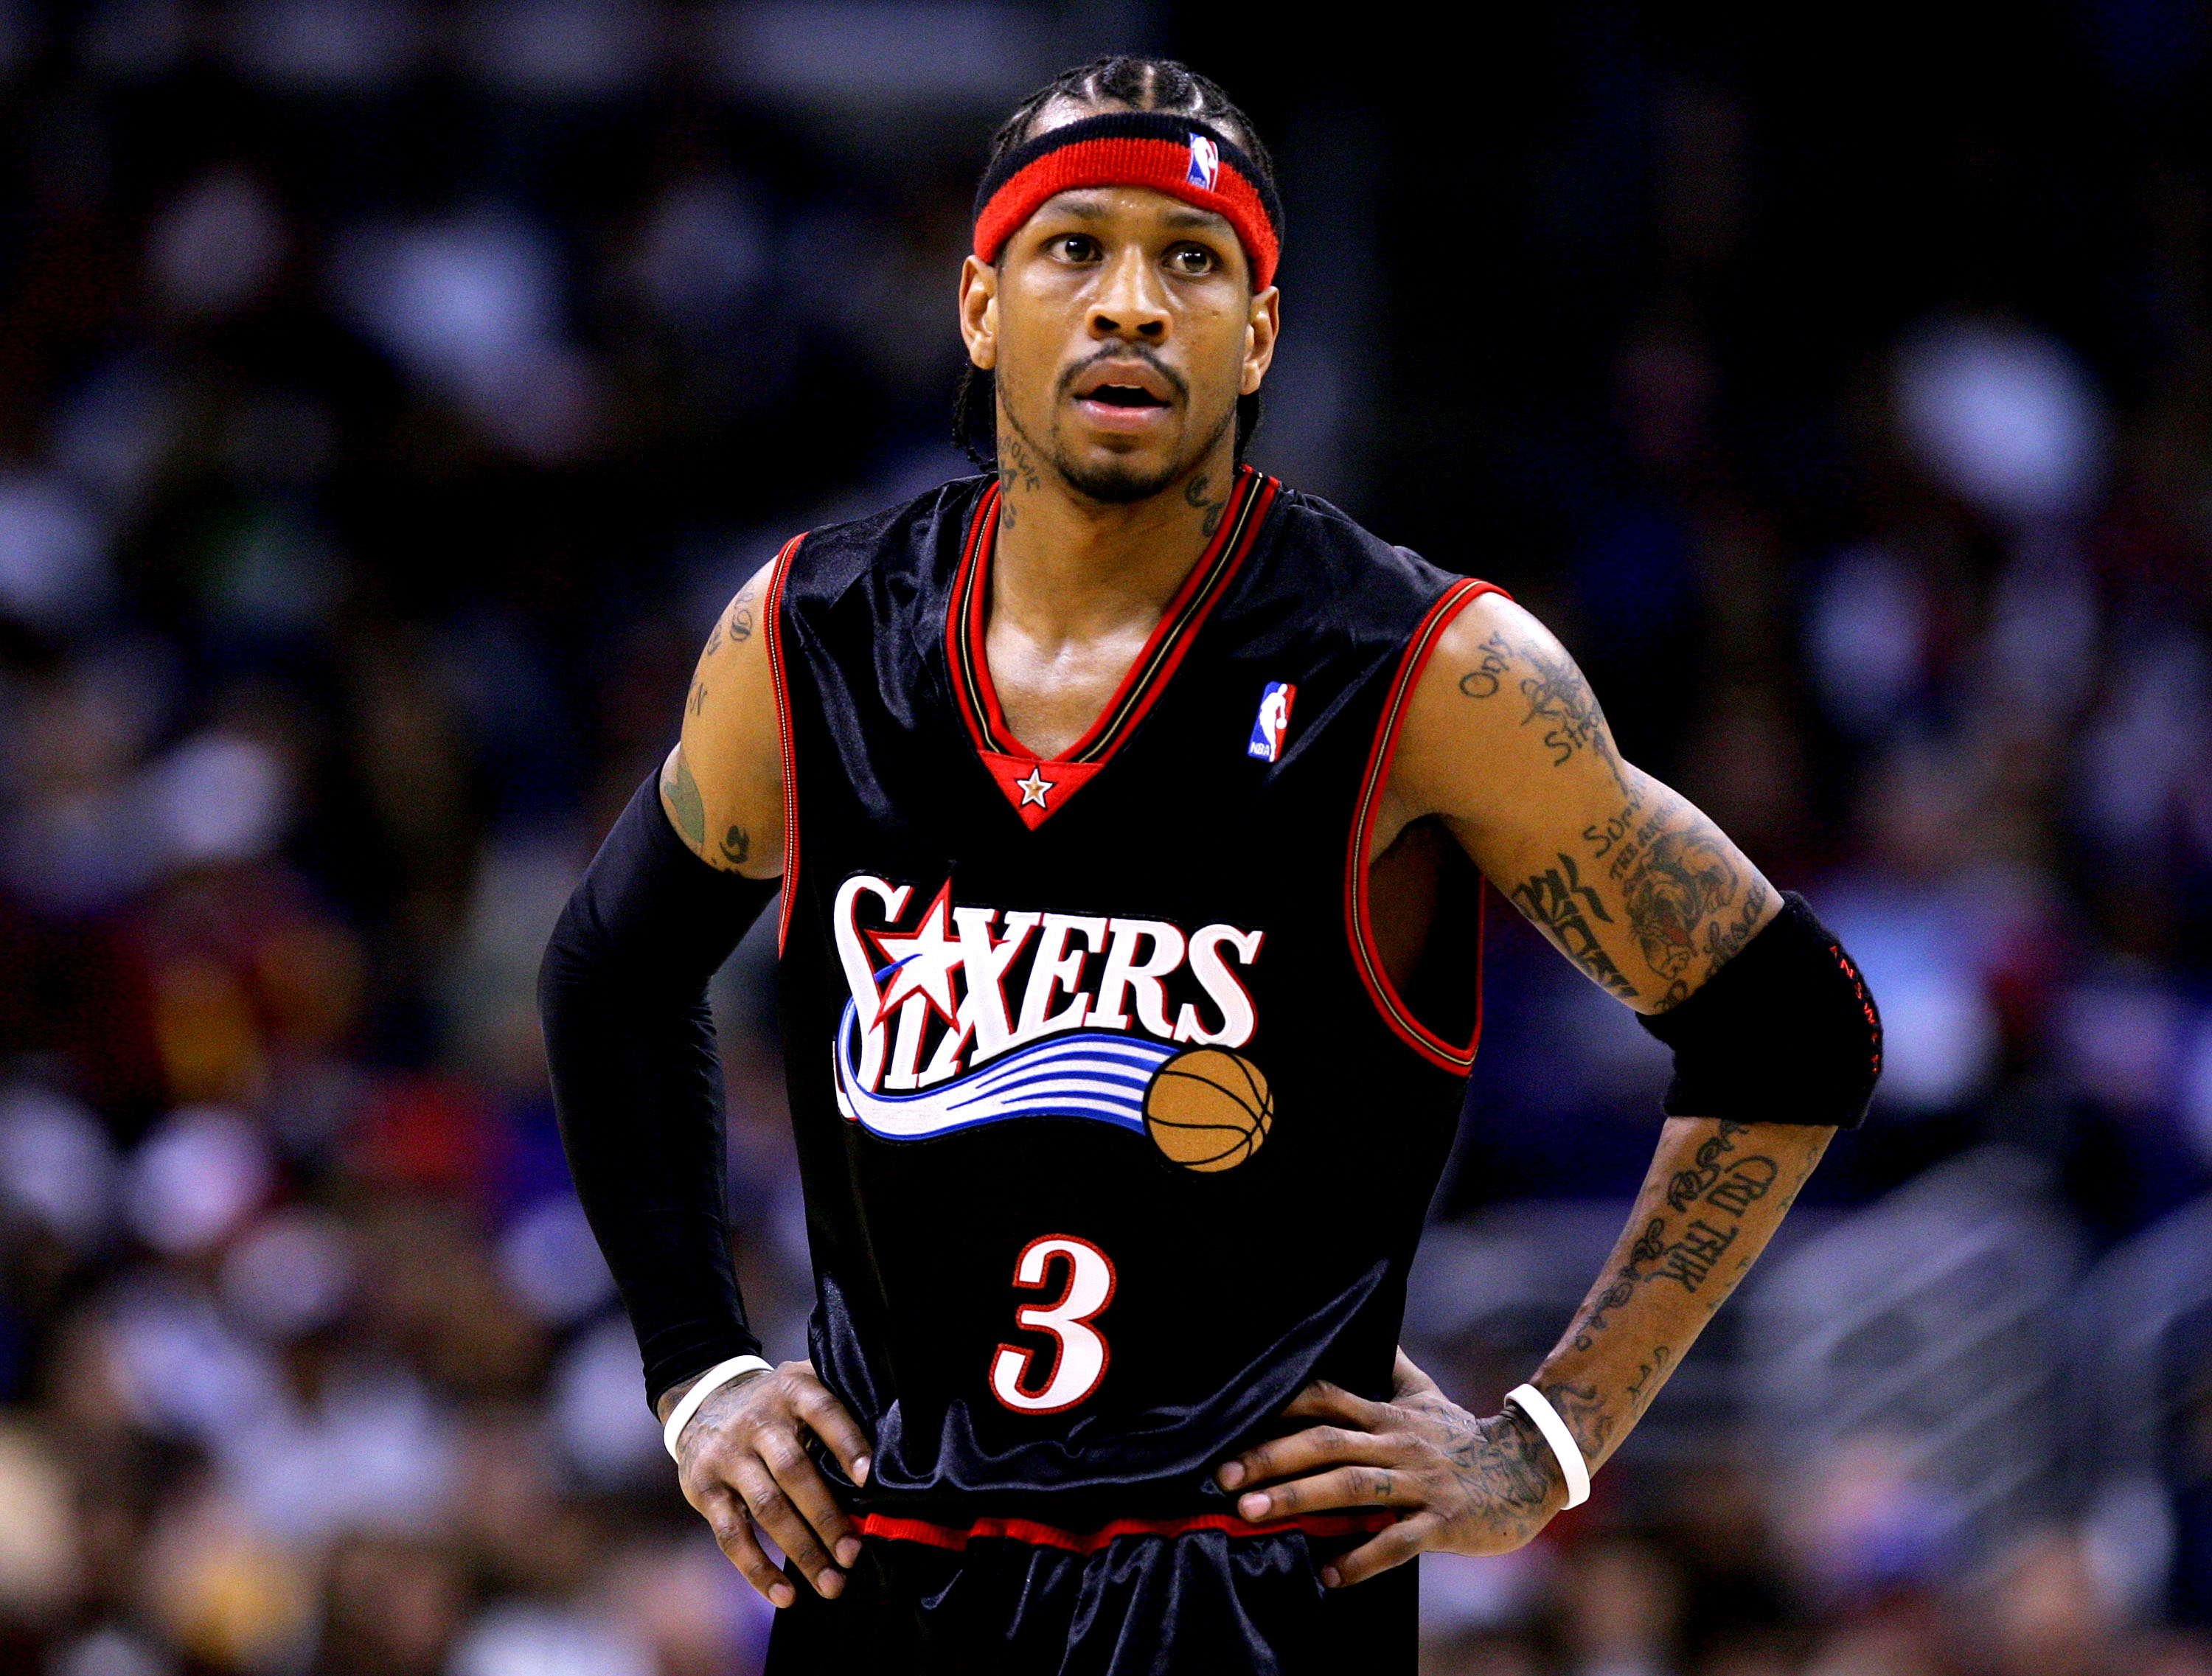 LOS ANGELES - JANUUARY 2:  Allen Iverson #3 of the Philadelphia 76ers stands on the court during the game against the Los Angeles Clippers on January 2, 2005 at Staples Center in Los Angeles, California. NOTE TO USER: User expressly acknowledges and agree